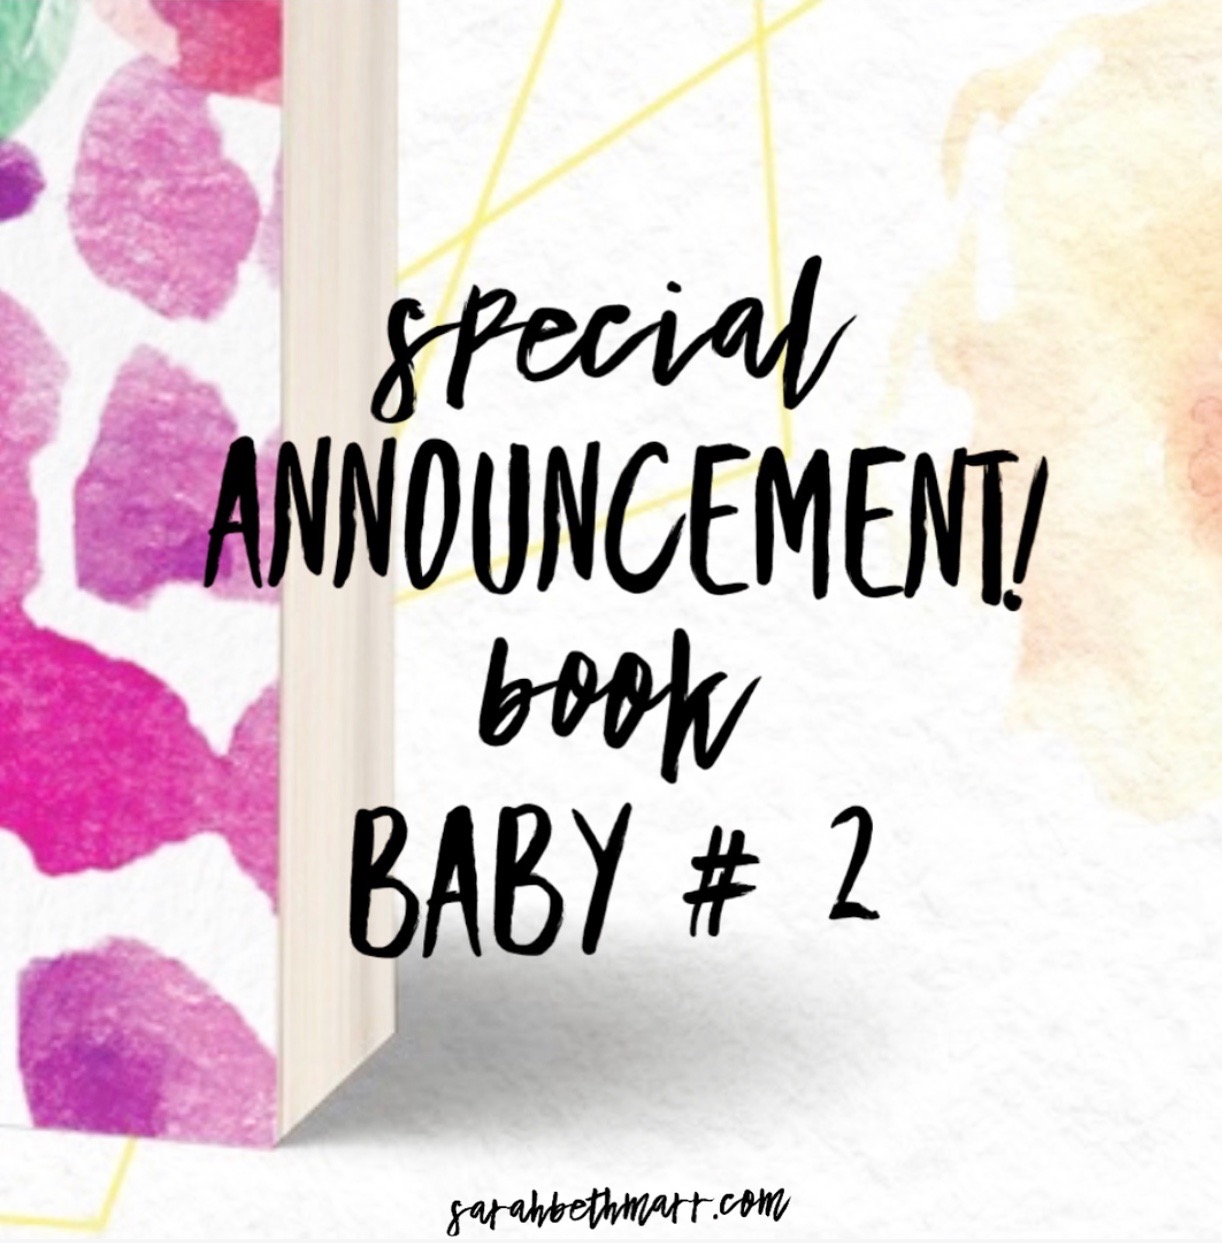 Special Announcement! Book Baby #2!